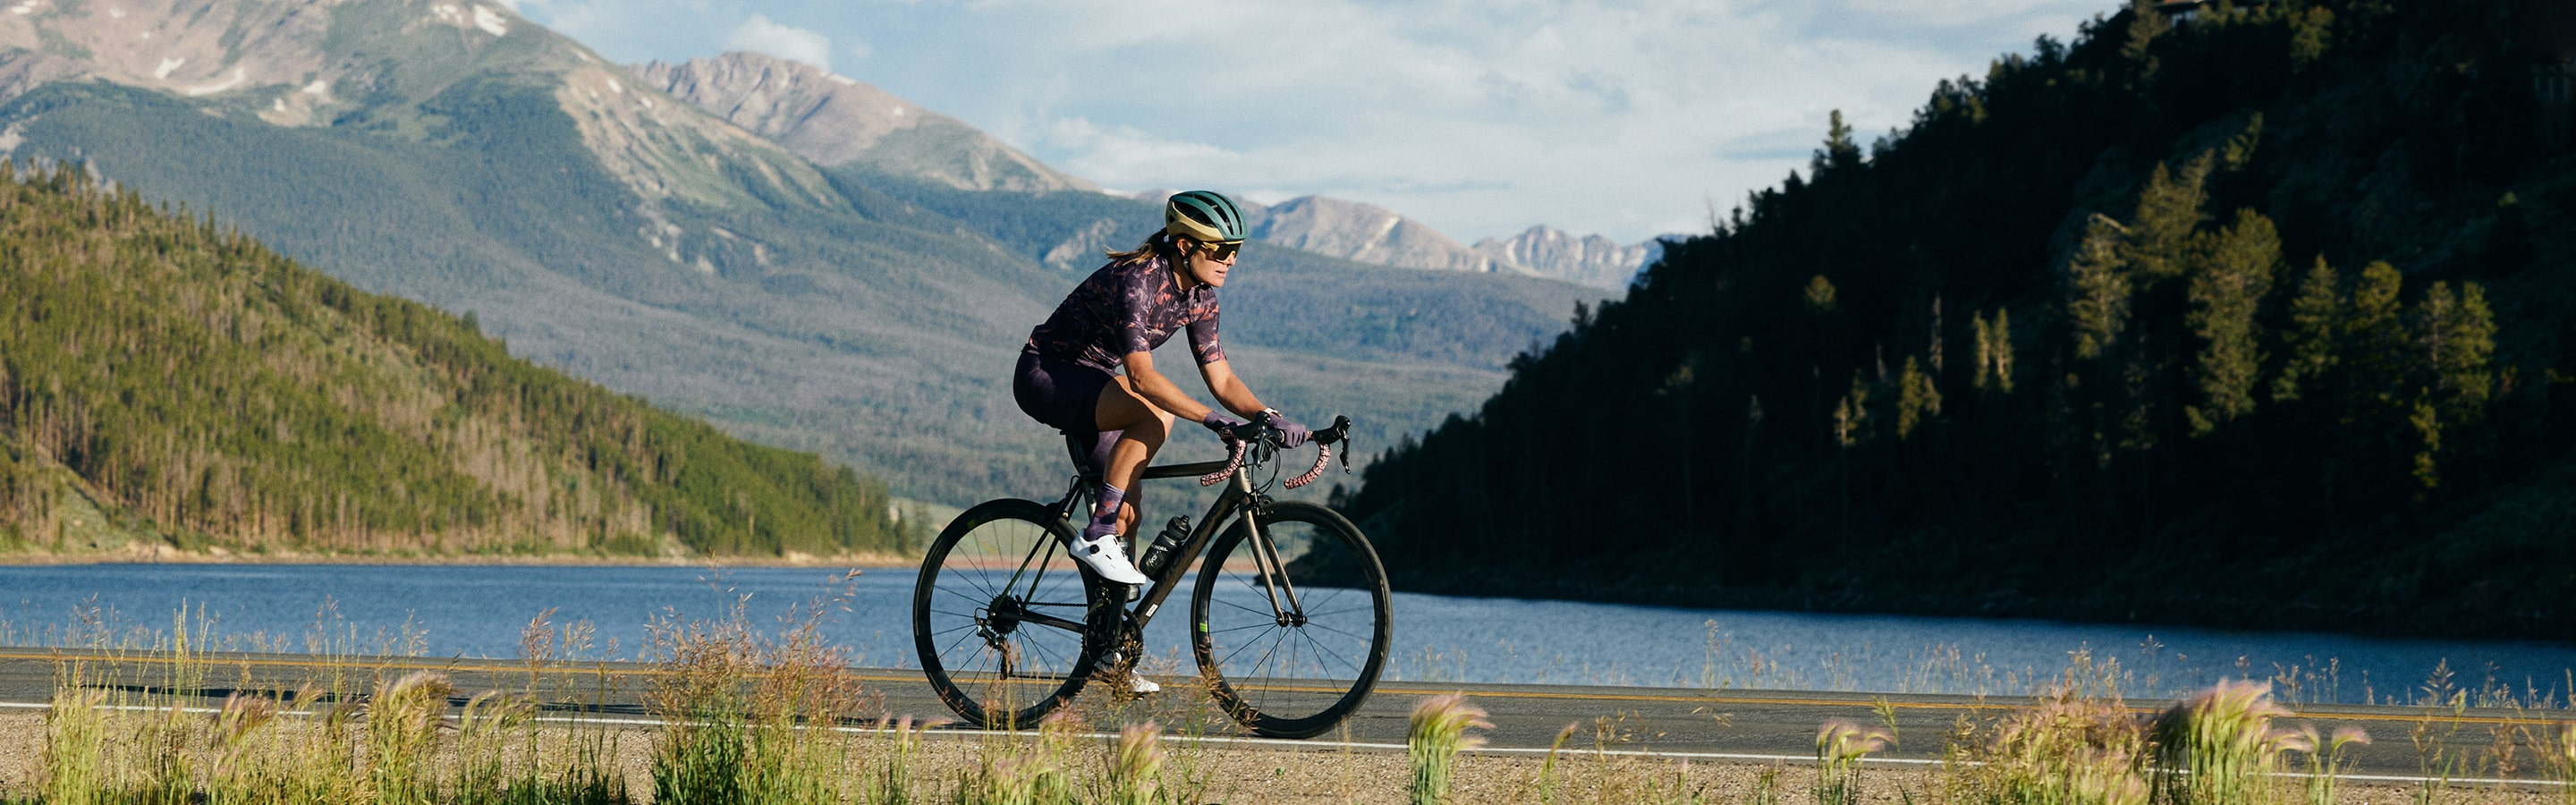 Cyclist in Purple Jersey Riding Through Scenic Area